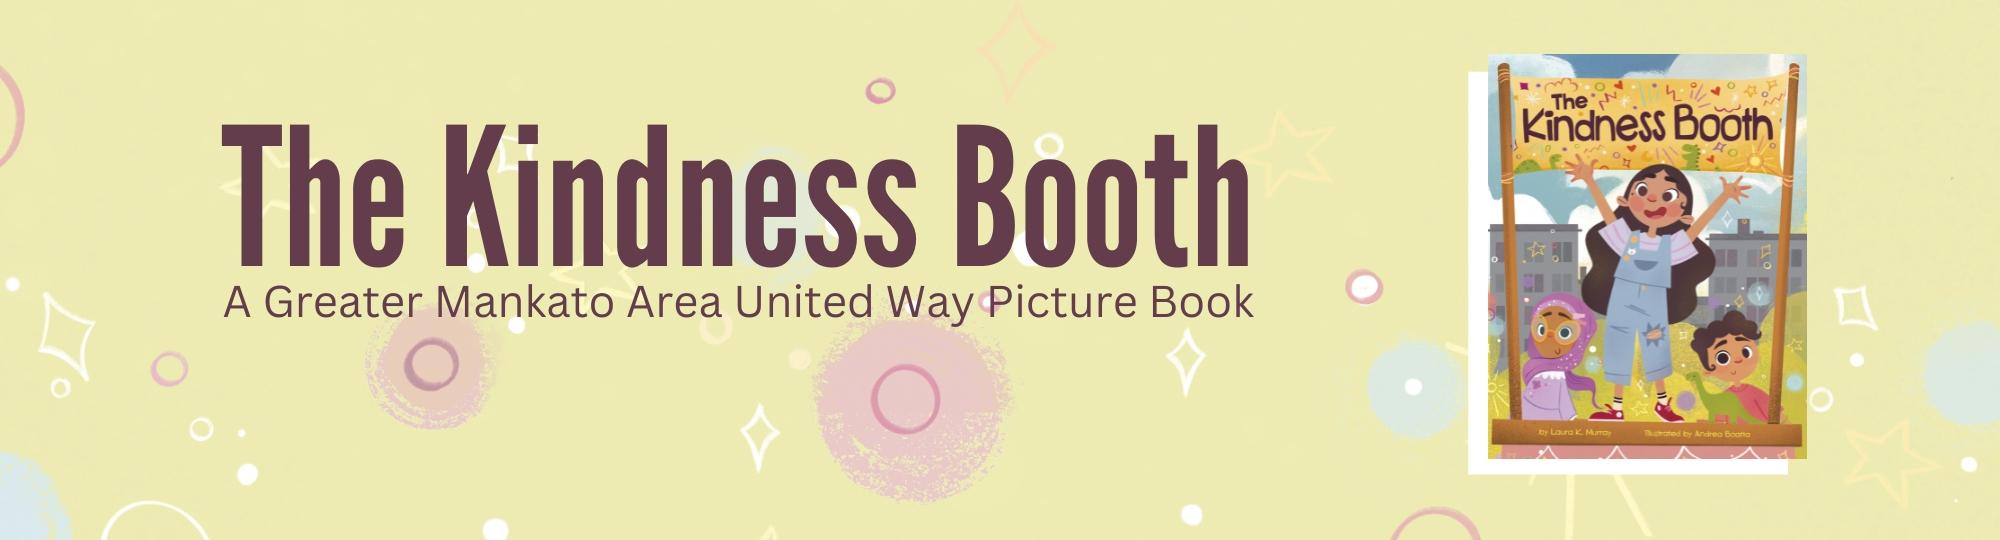 The Kindness Booth: A Greater Mankato Area United Way Picture Book